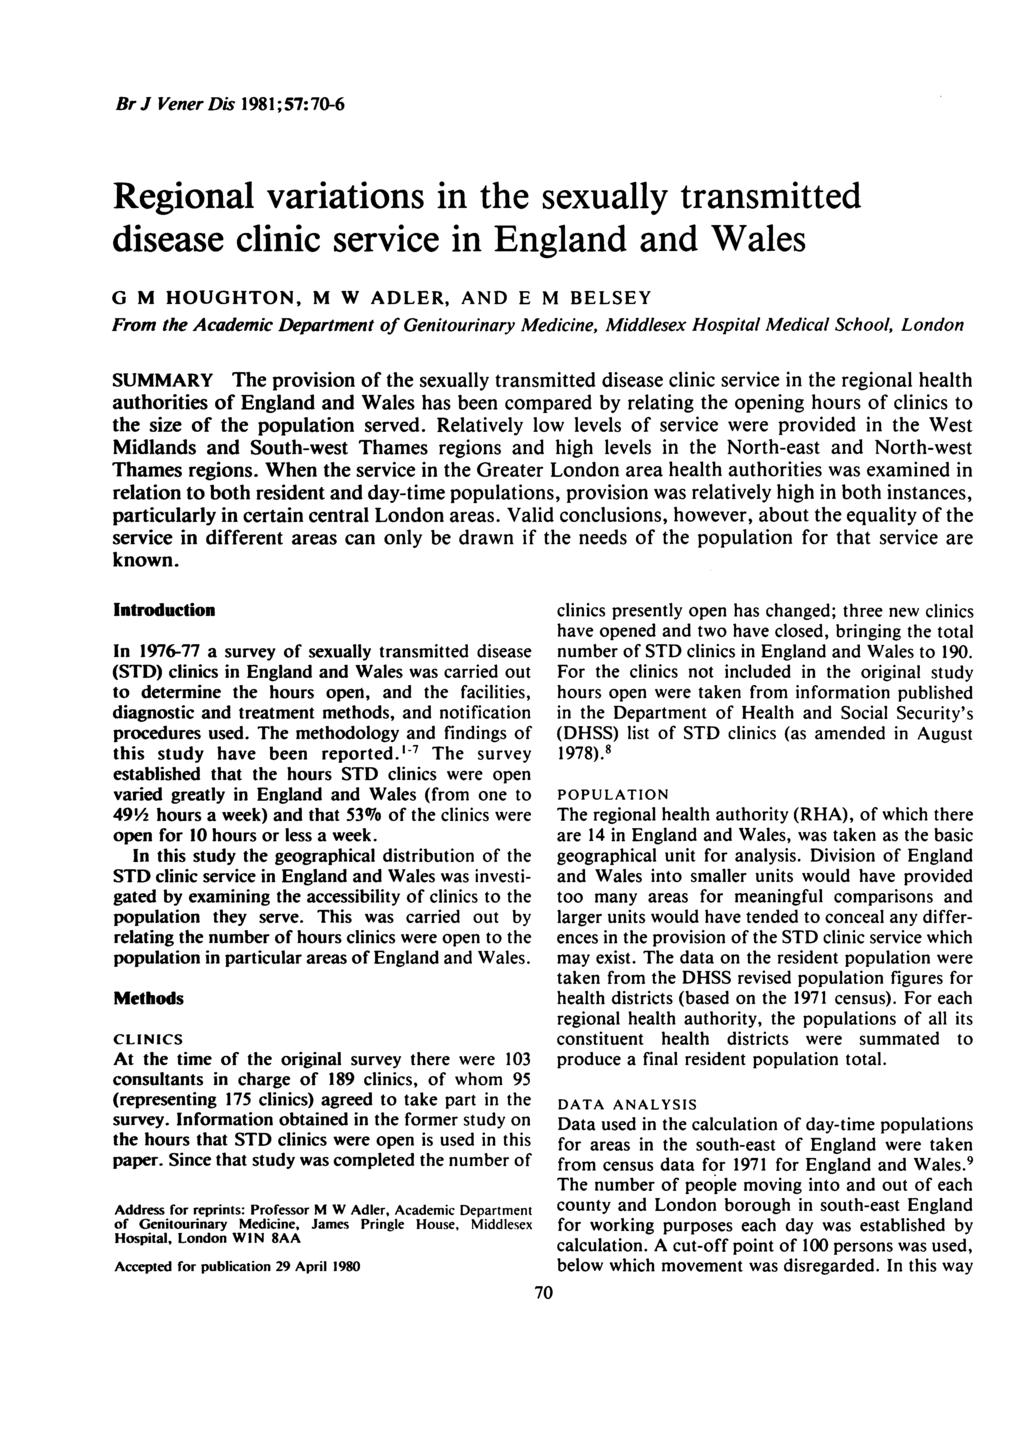 BrJ VenerDis 1981;57:70-6 Regional variations in the sexually transmitted disease clinic service in England and Wales G M HOUGHTON, M W ADLER, AND E M BELSEY From the Academic Department of